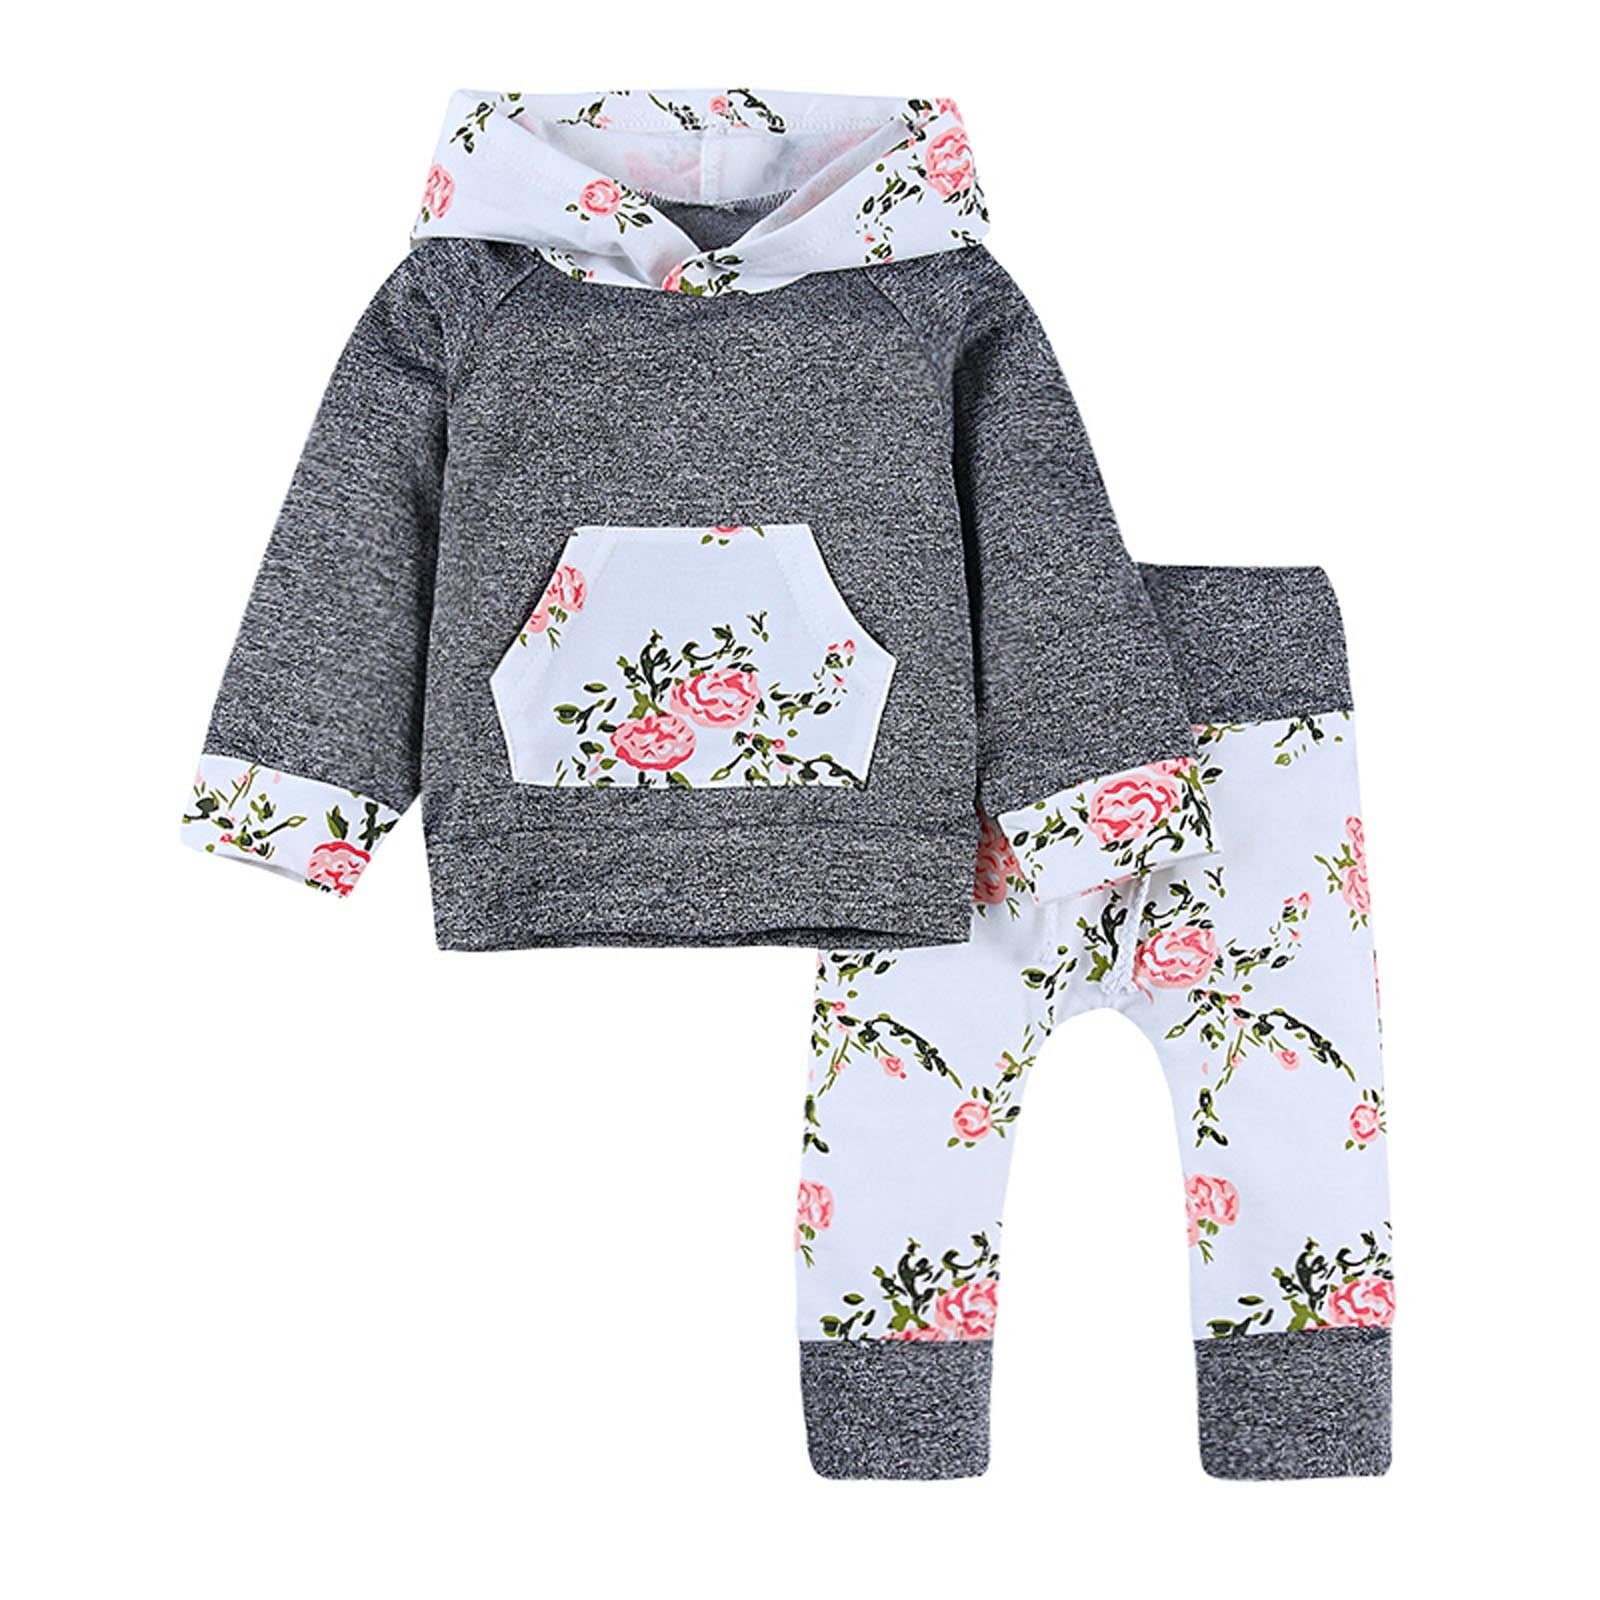 Newborn Clothes Fall/Winter Girls Flower Hoodies Hooded Sweater Pants Cotton Outfits